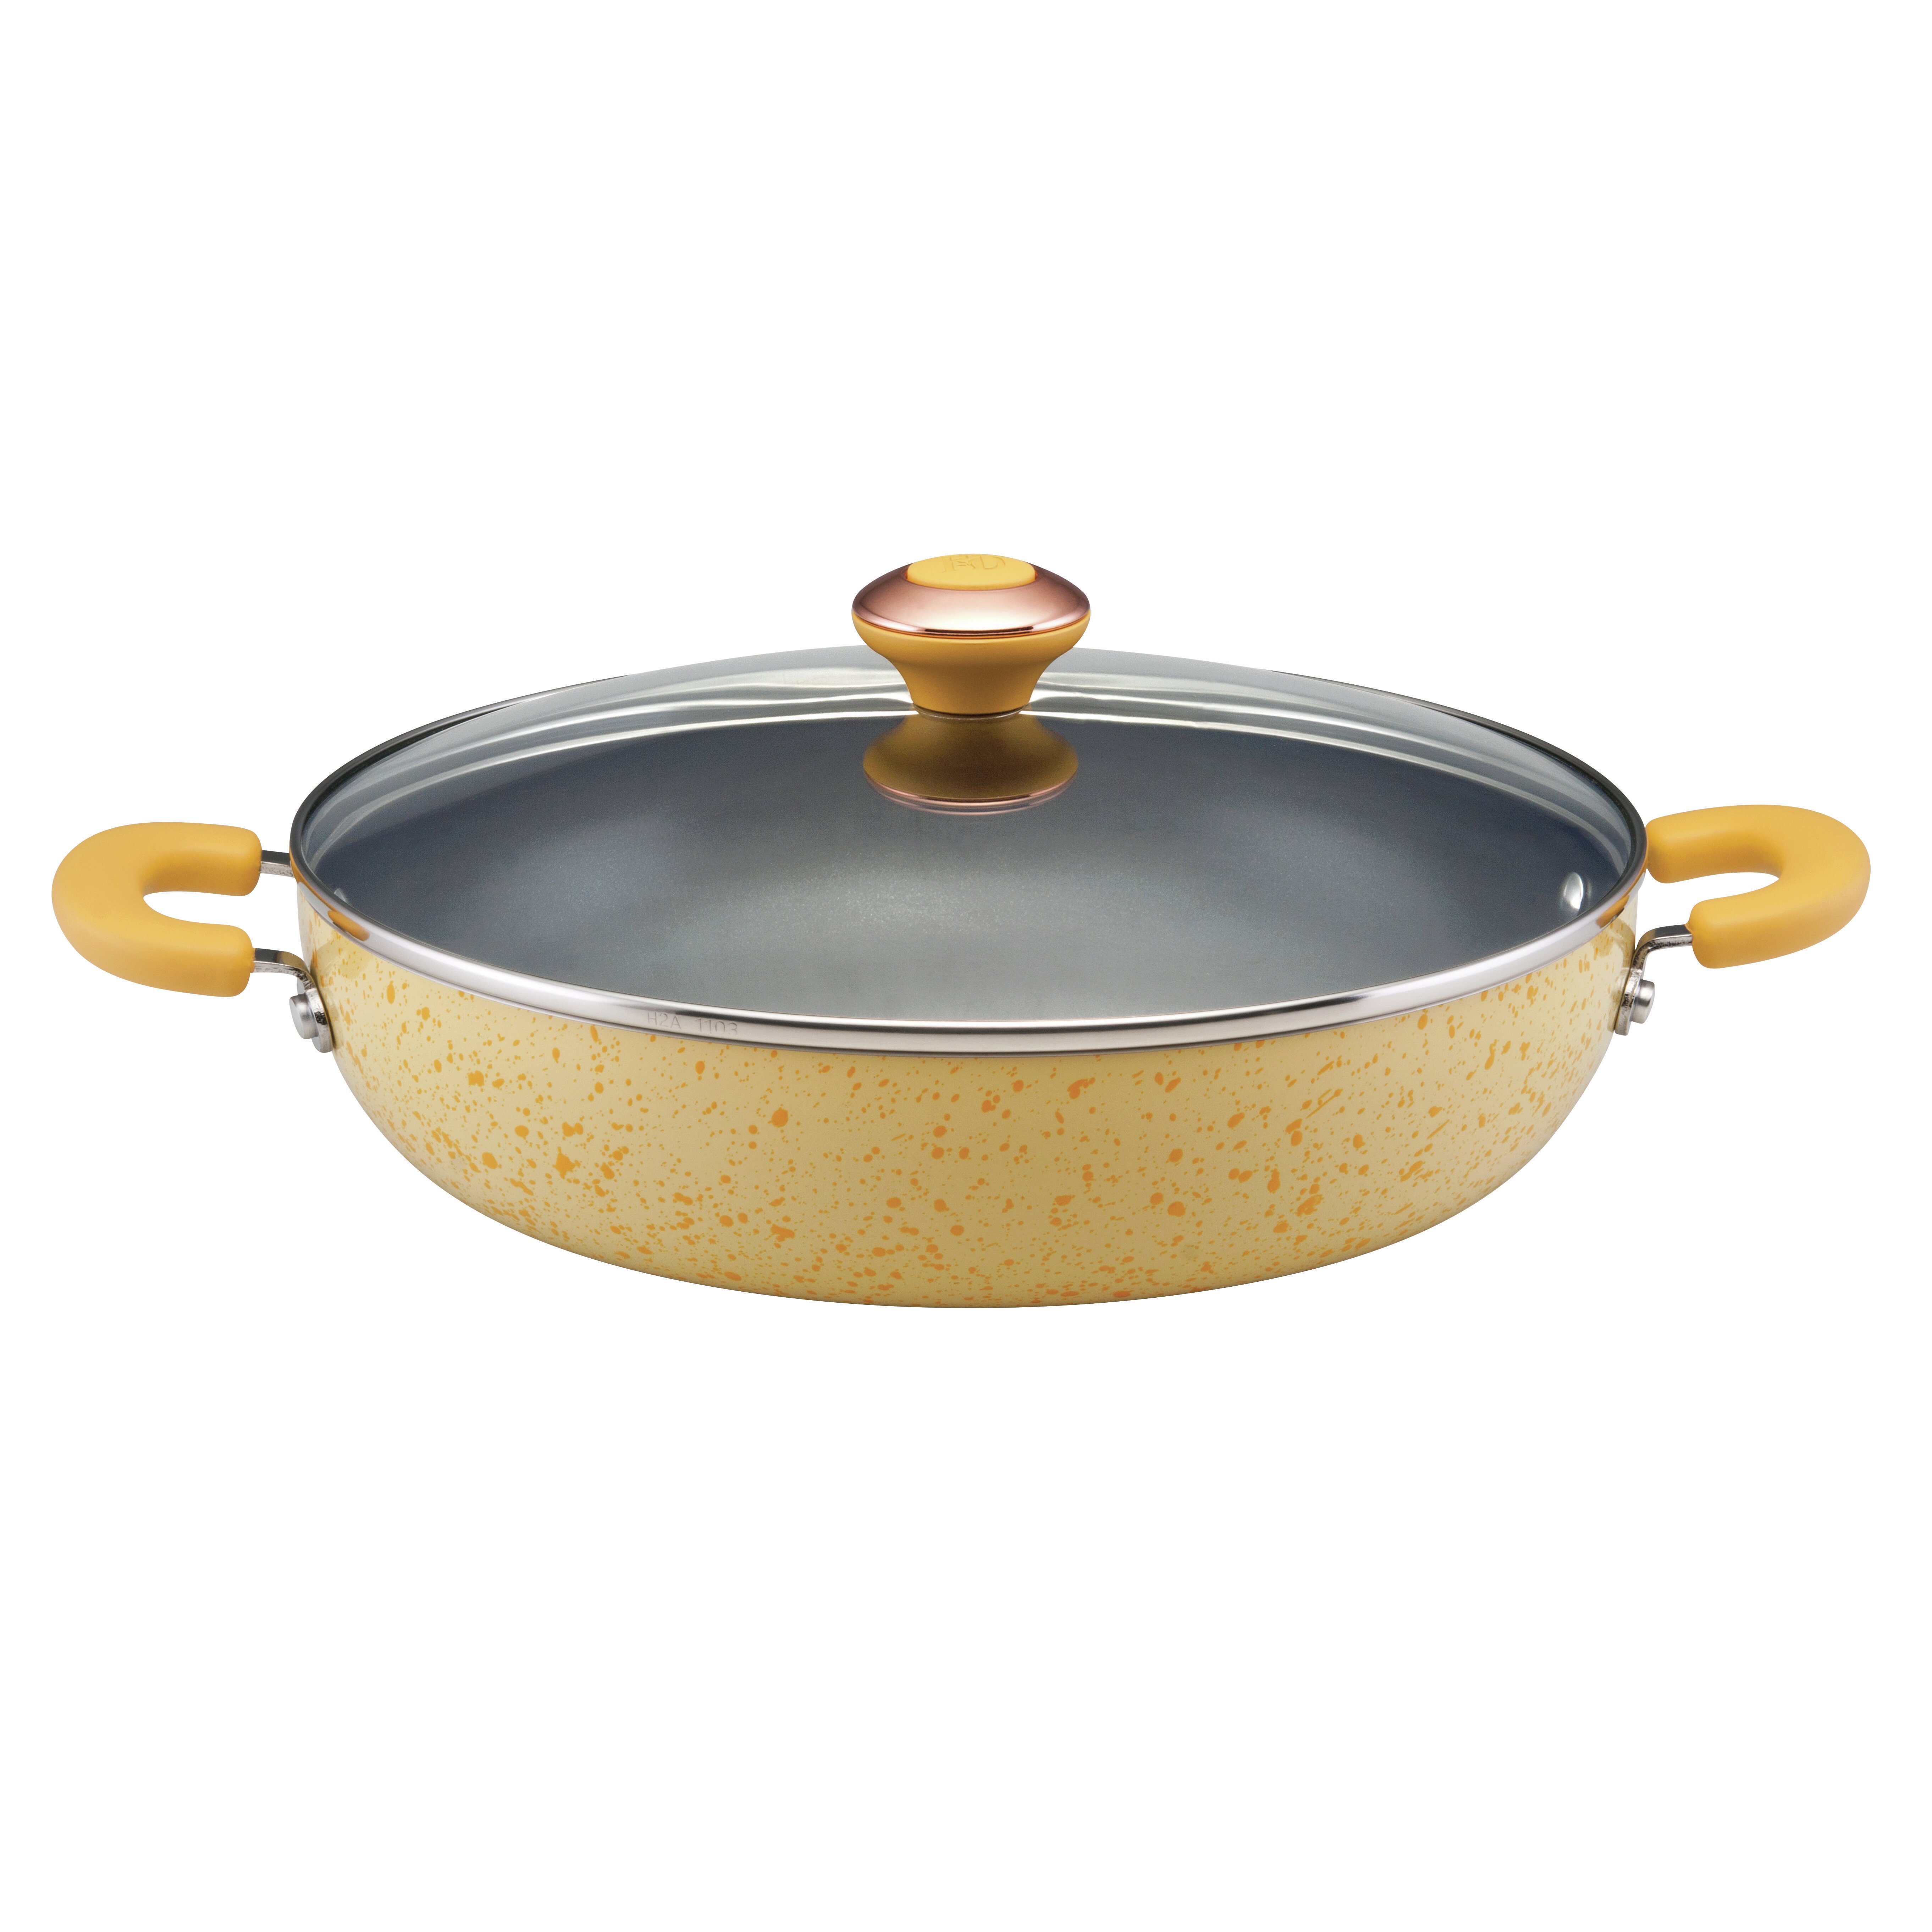 Paula Deen Signature 12" Non-Stick Frying Pan with Lid ...